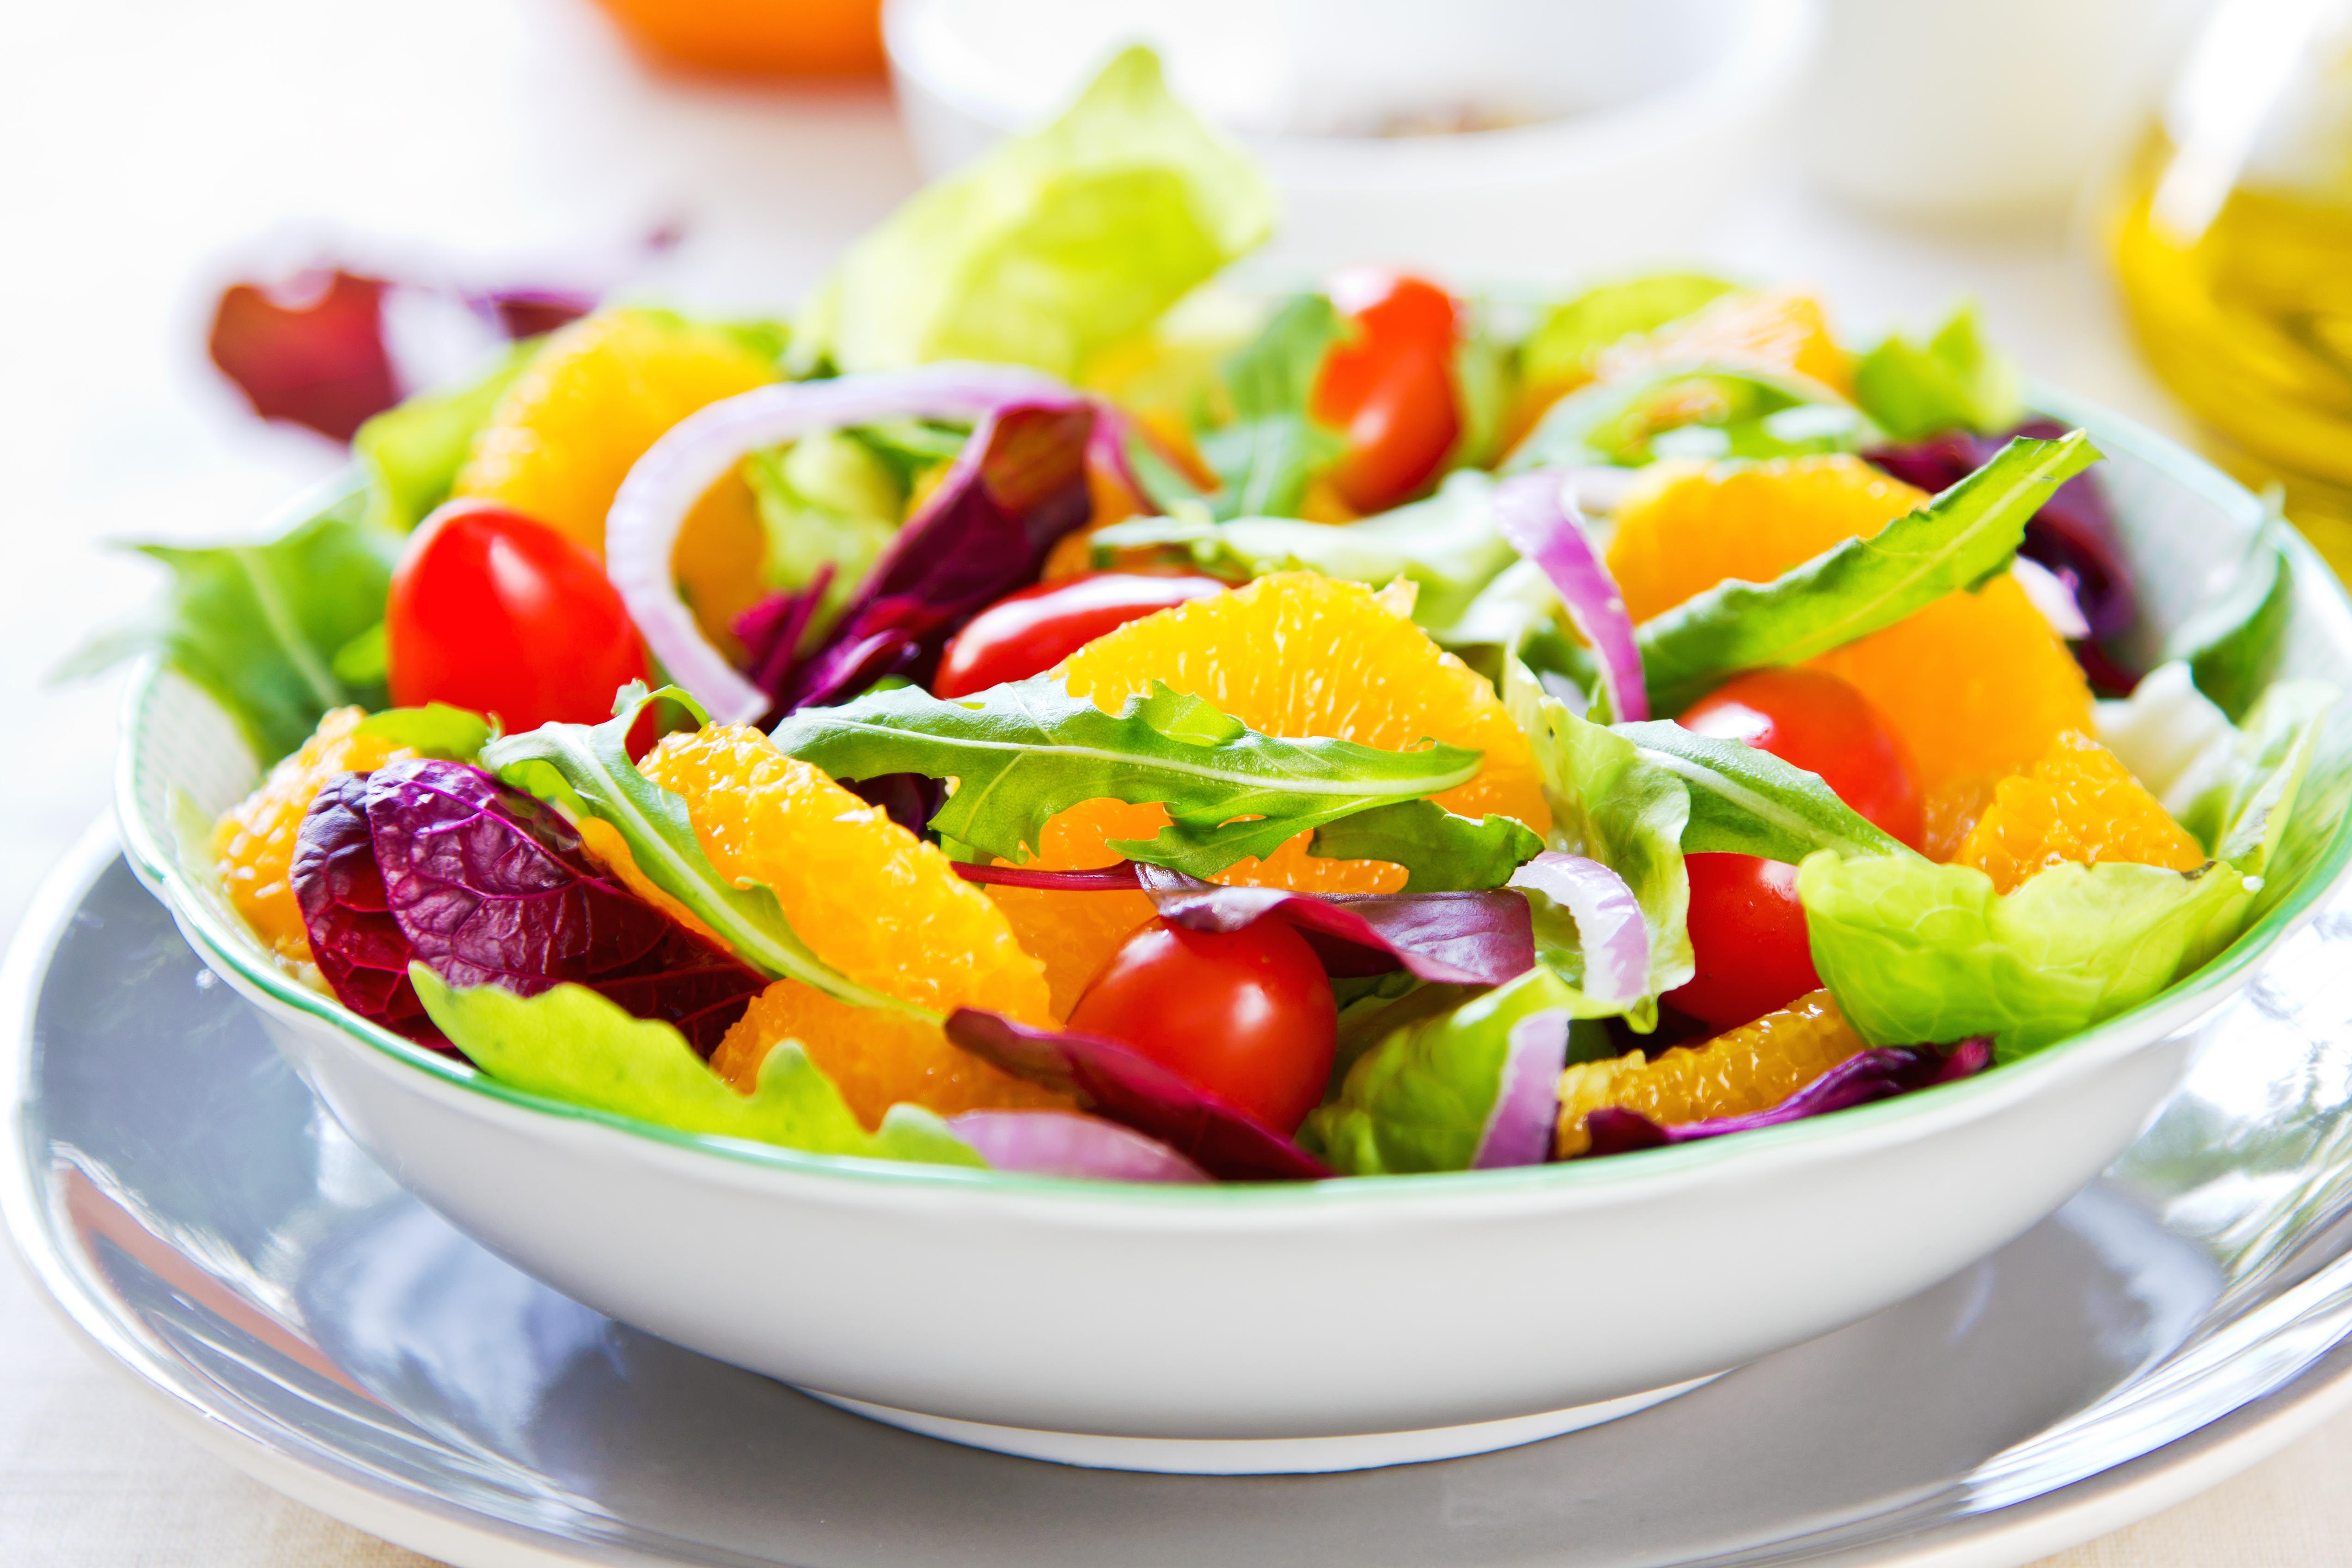 Colorful salad with tomatoes and canned mandarin oranges.